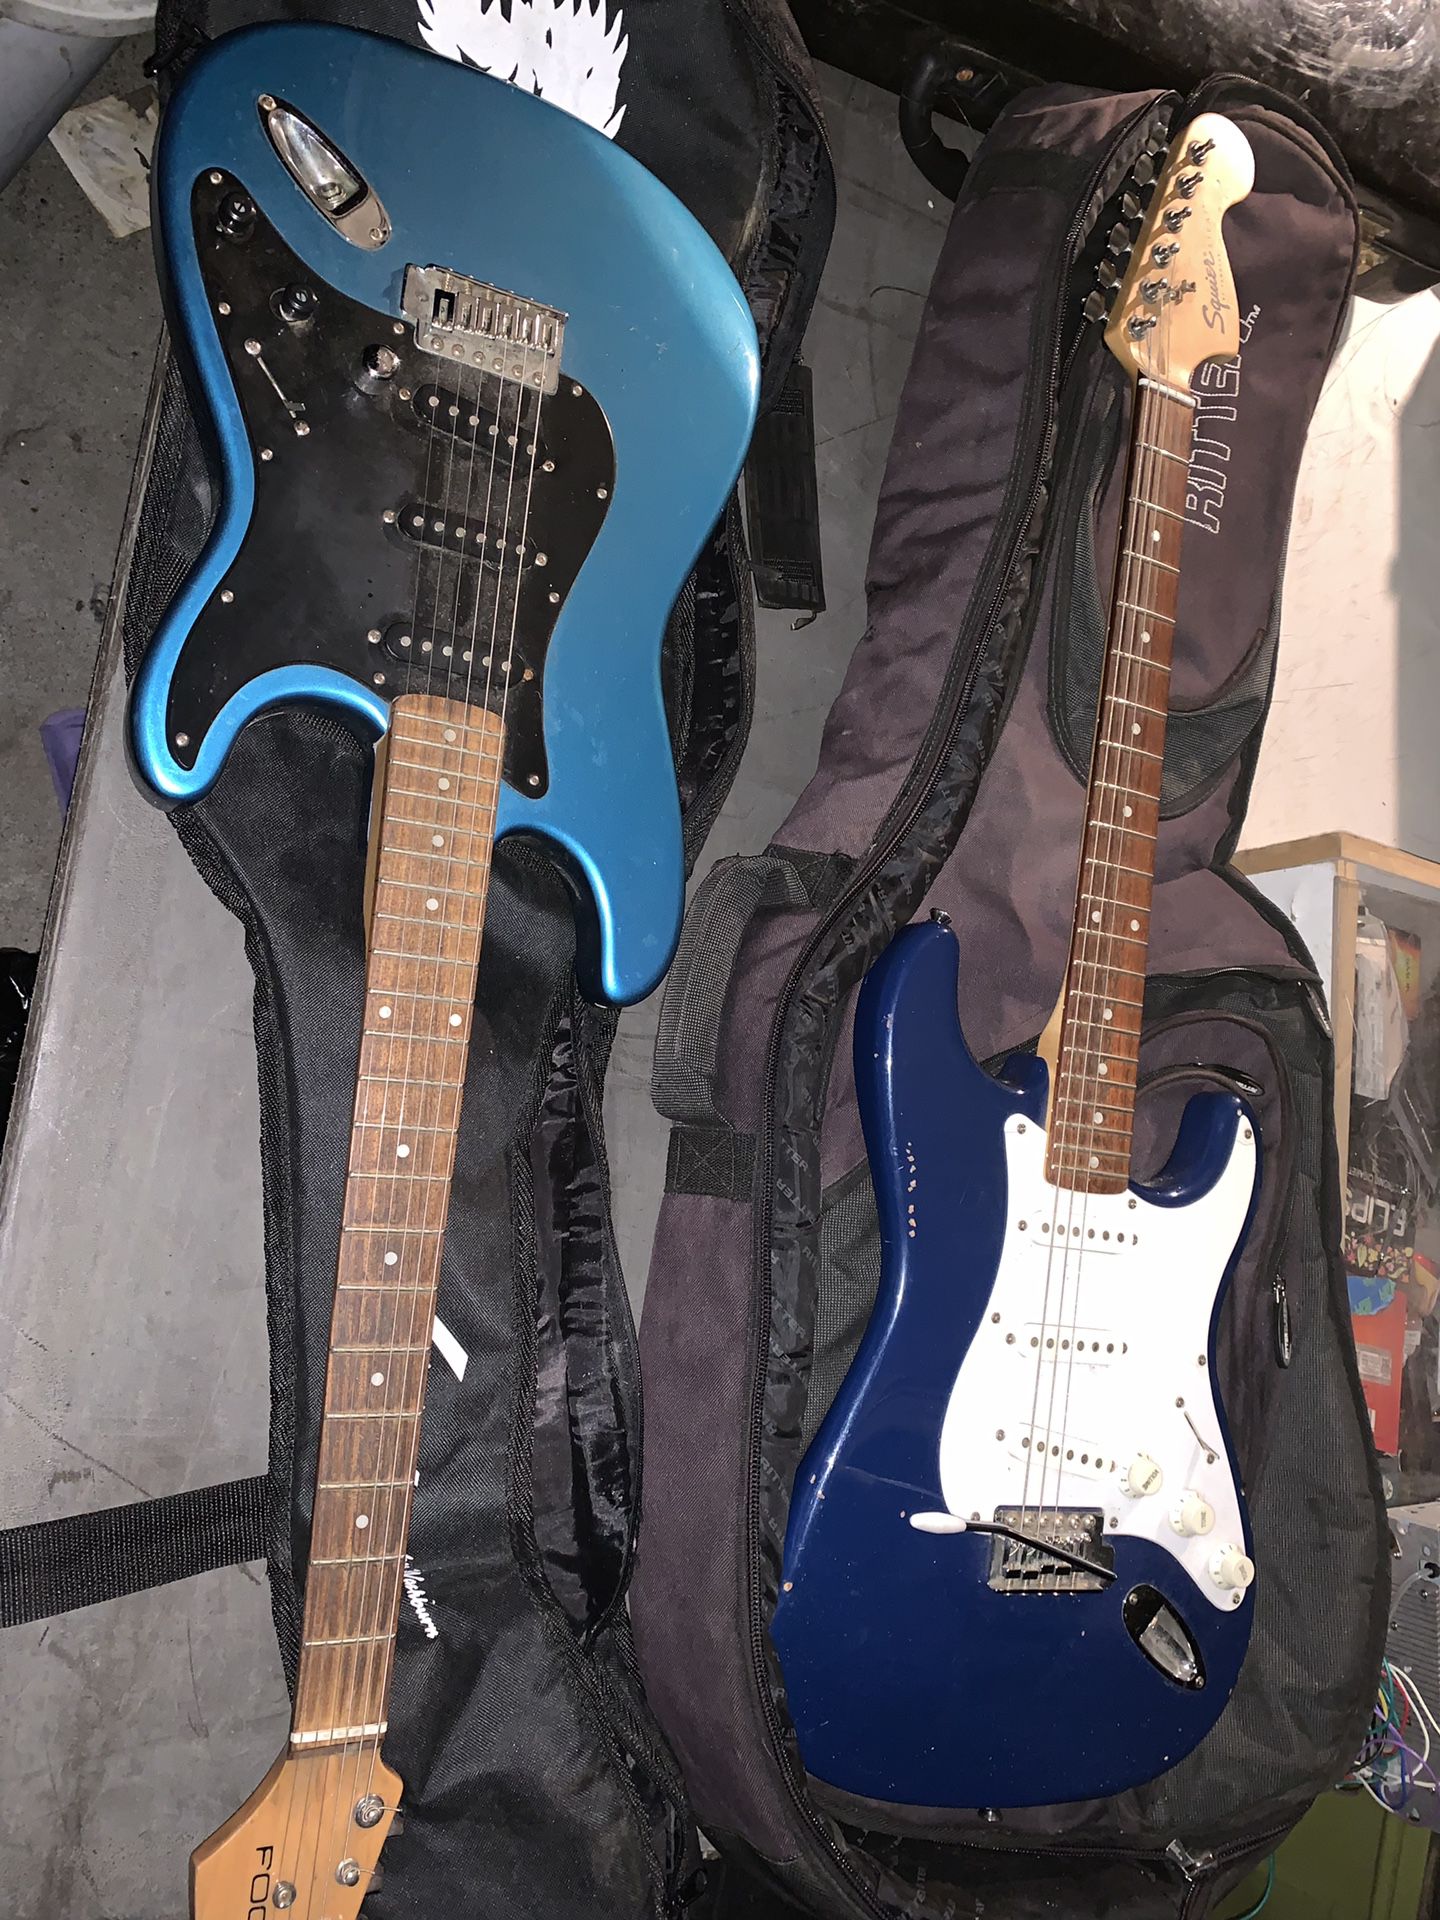 2 ELECTRIC GUITARS FOR ONE PRICE